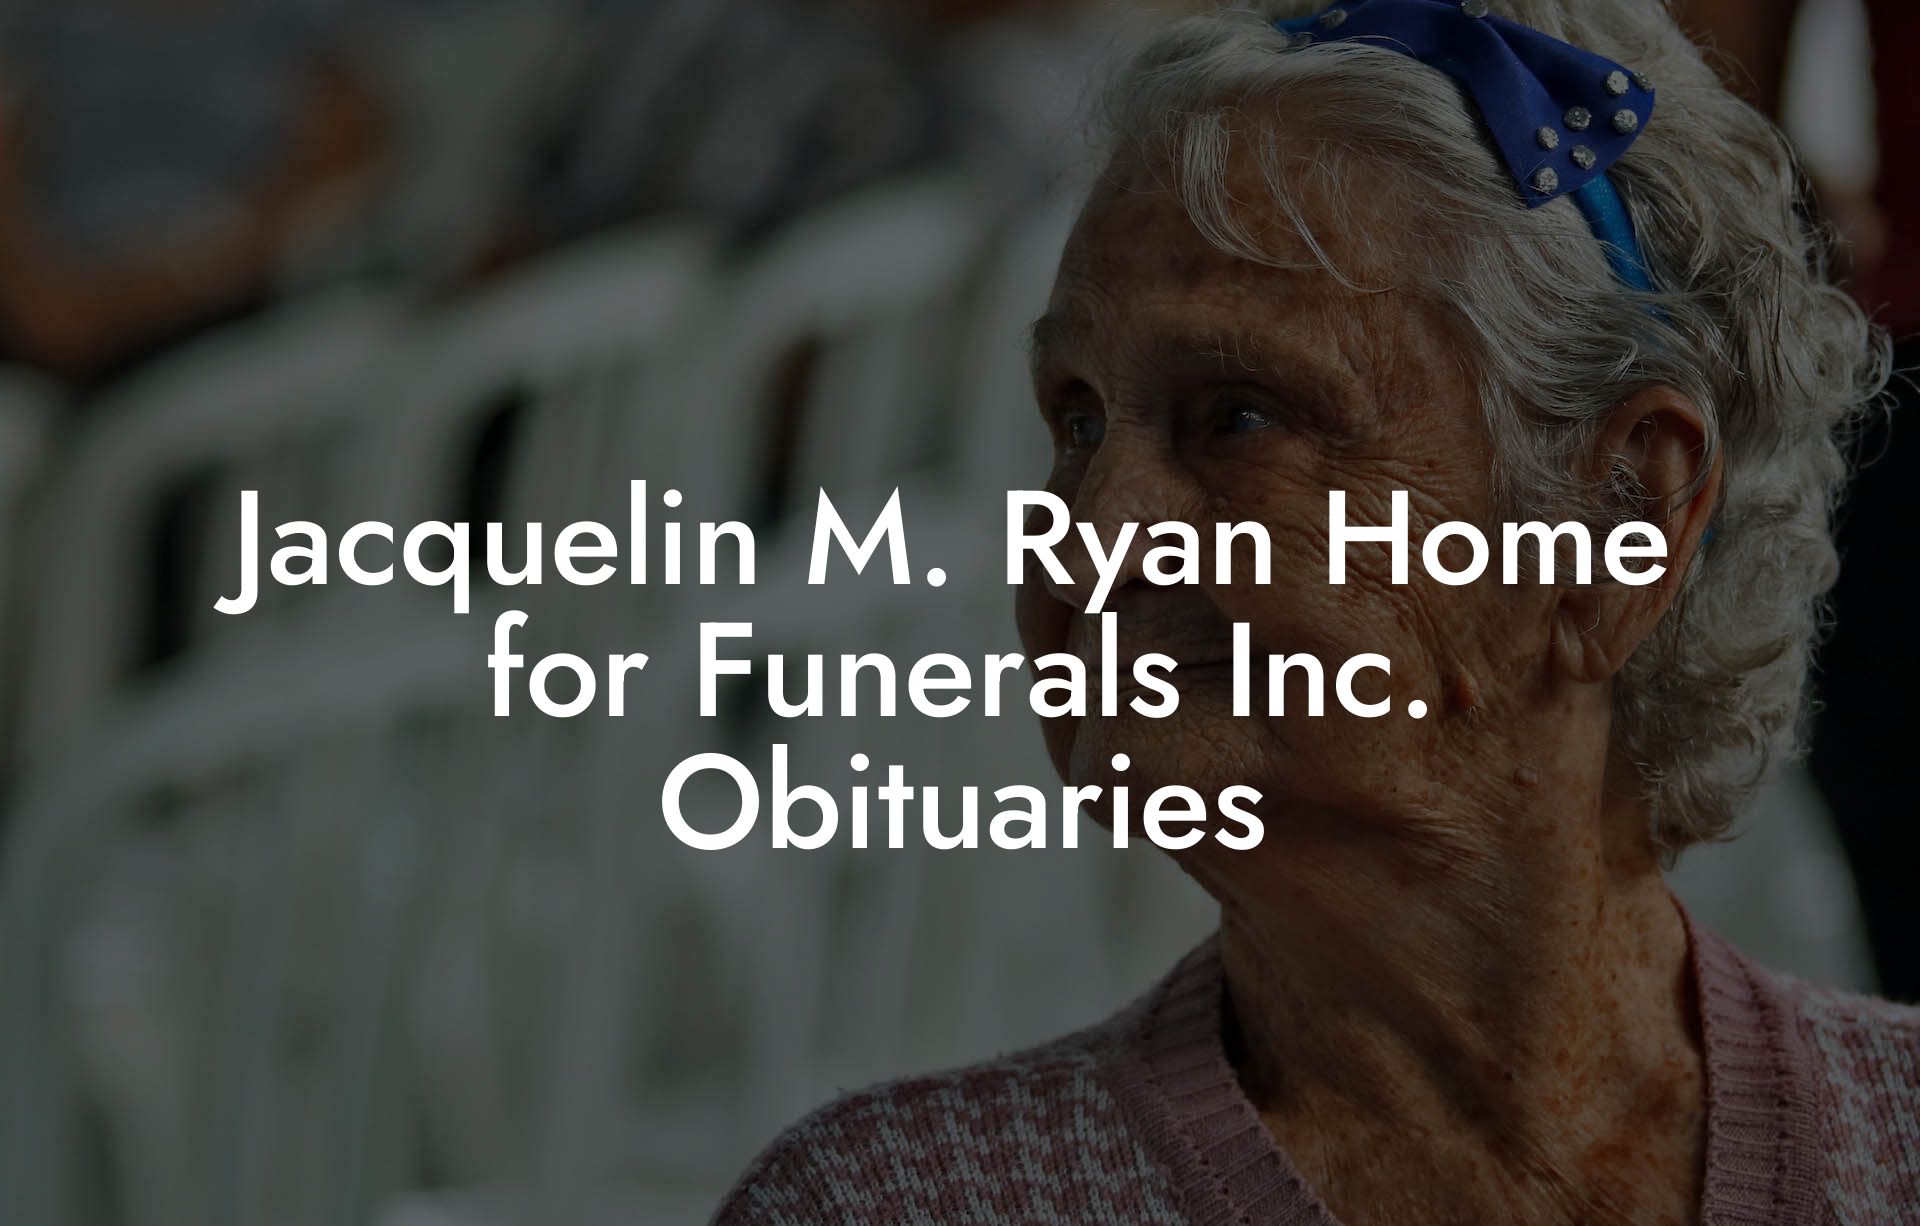 Jacquelin M. Ryan Home for Funerals Inc. Obituaries